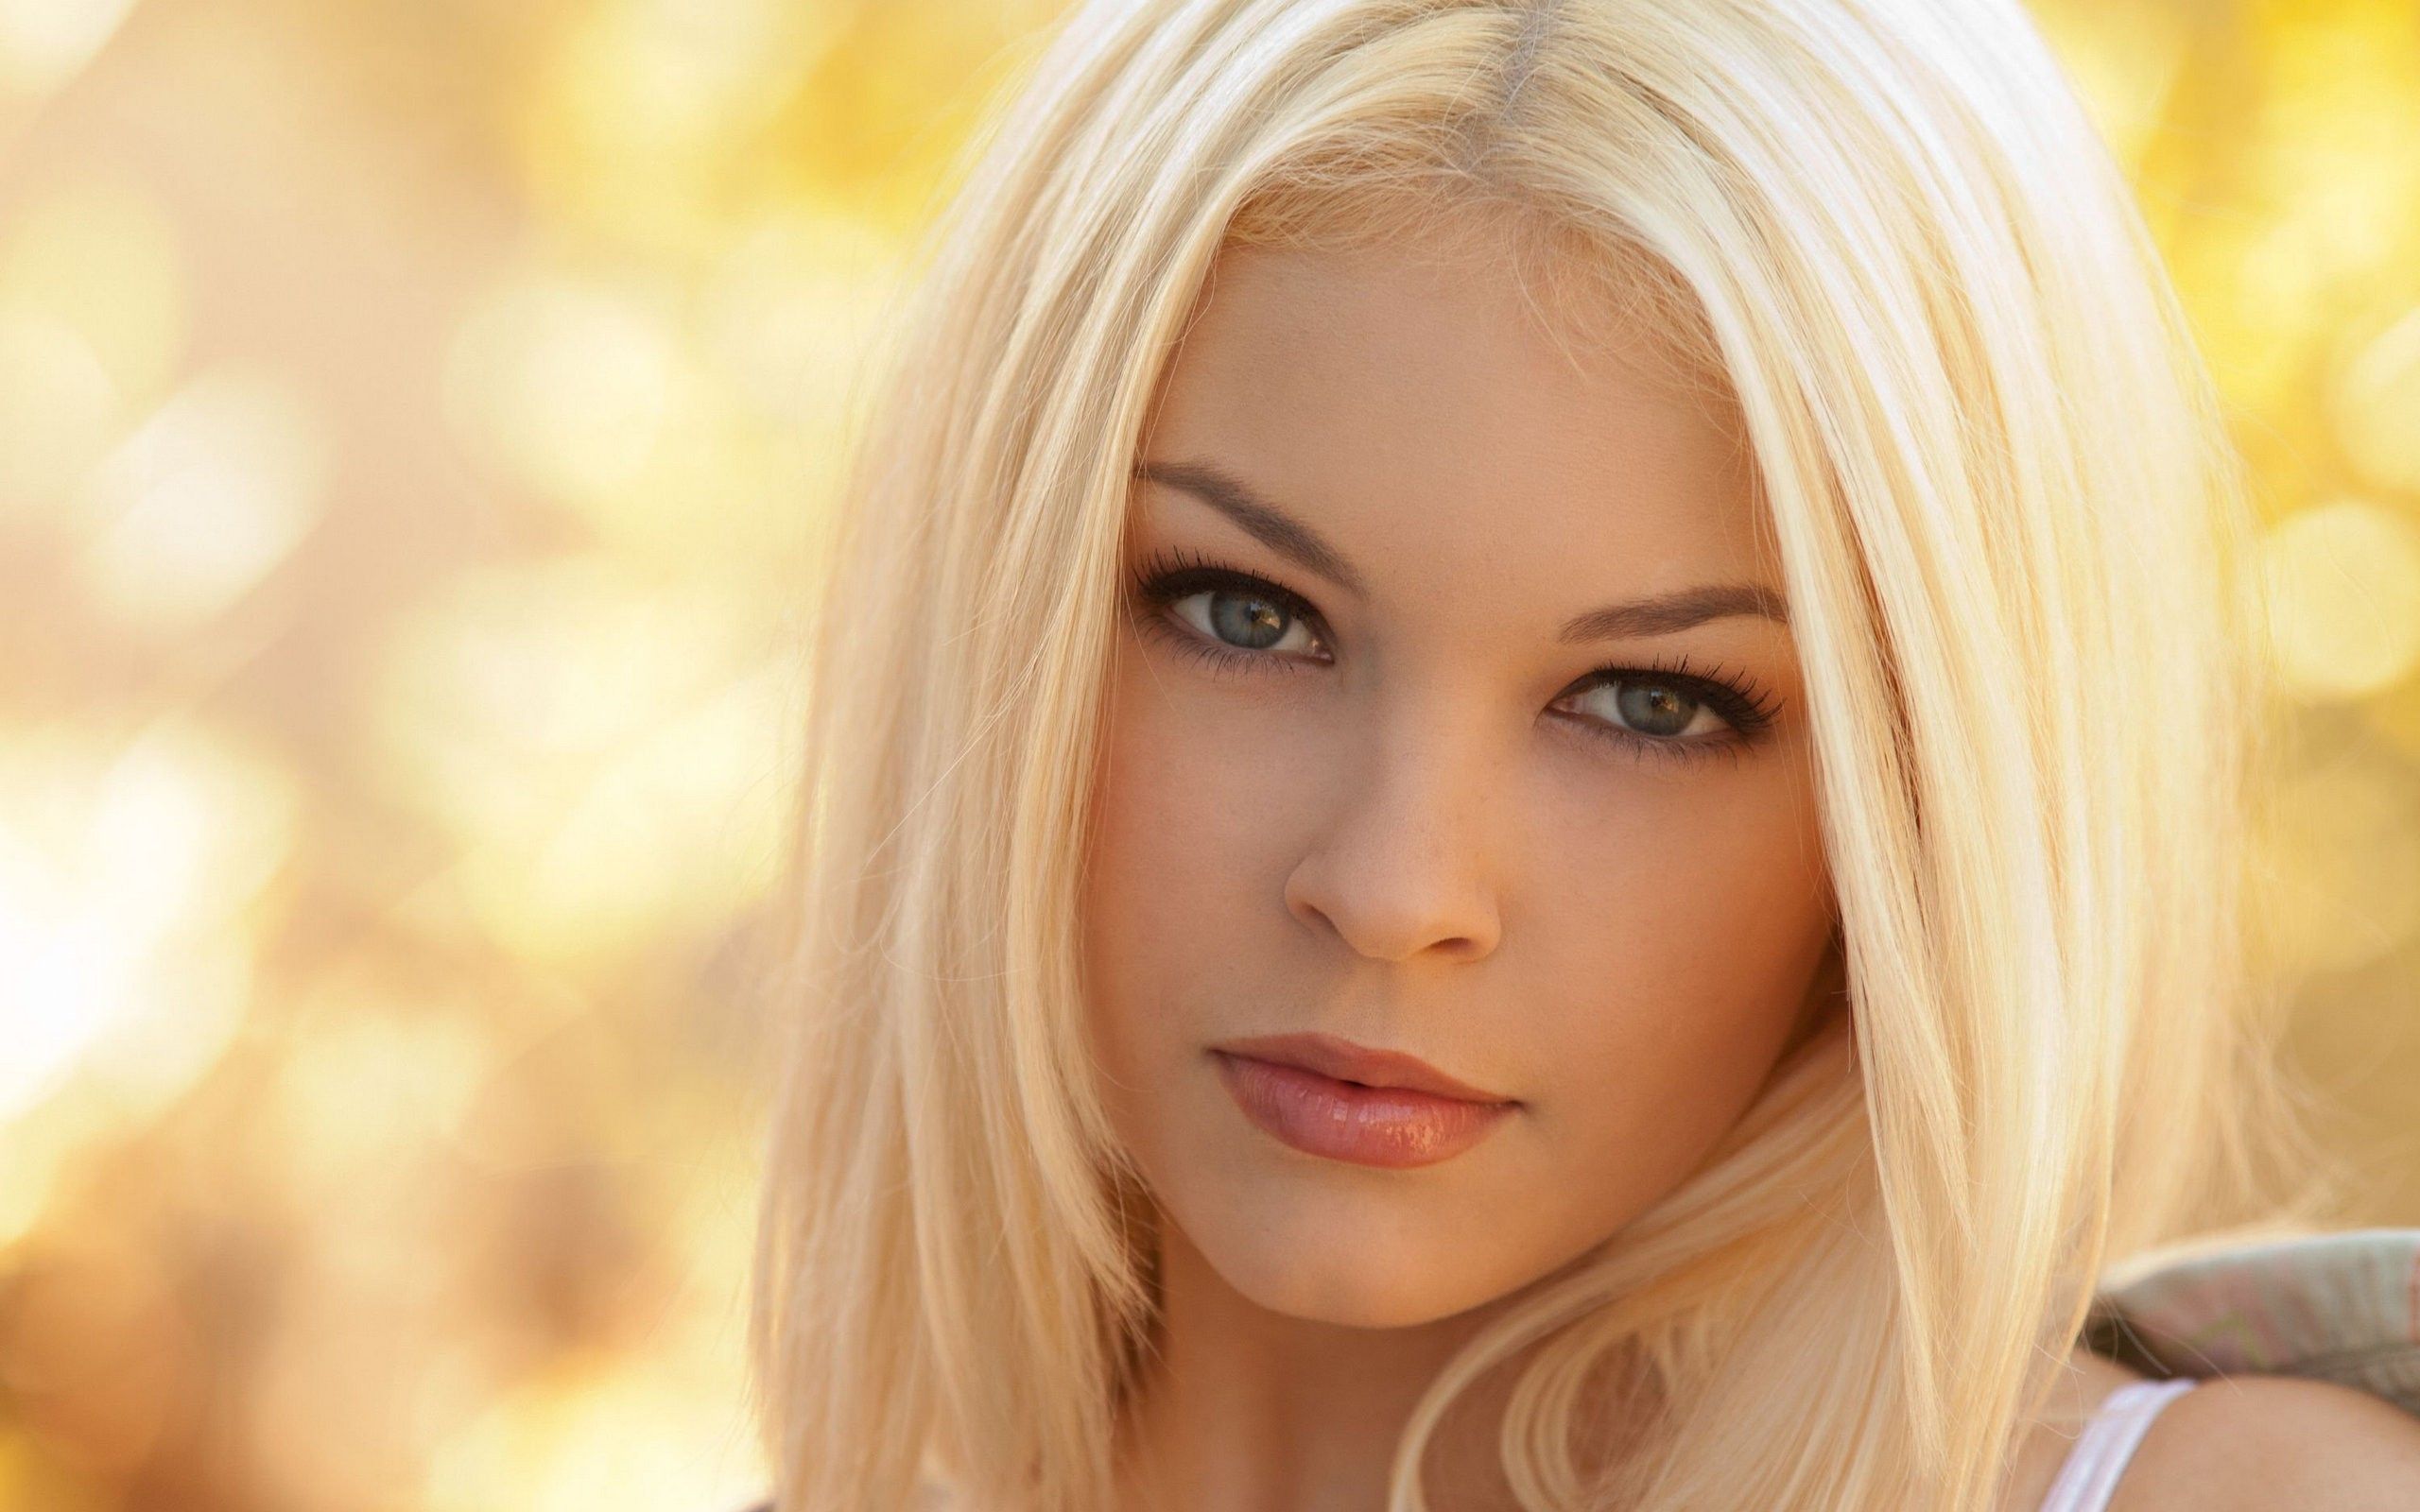 Blonde girl green eyes Wallpapers Pictures